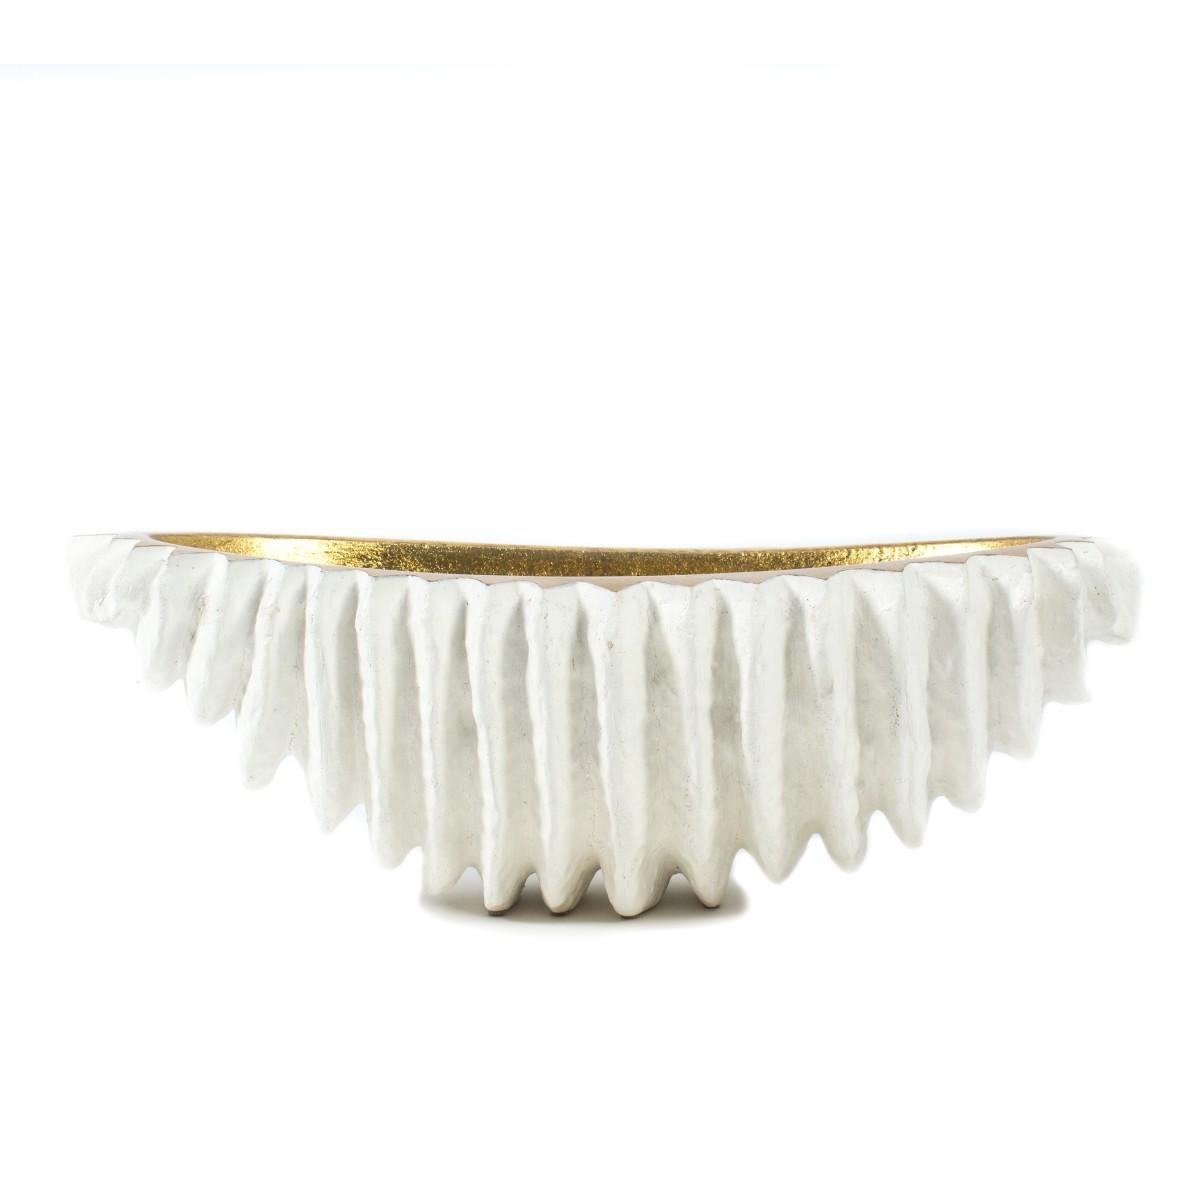 A dramatic, large scale white and gold centerpiece bowl by Mecox Gardens, meanings 24 inches in length.  Features a sculpture; seashell-like exterior and contrasting gilt interior.  Metal. 

Dimensions: 24 inches L x 13 inches D × 8 inches H